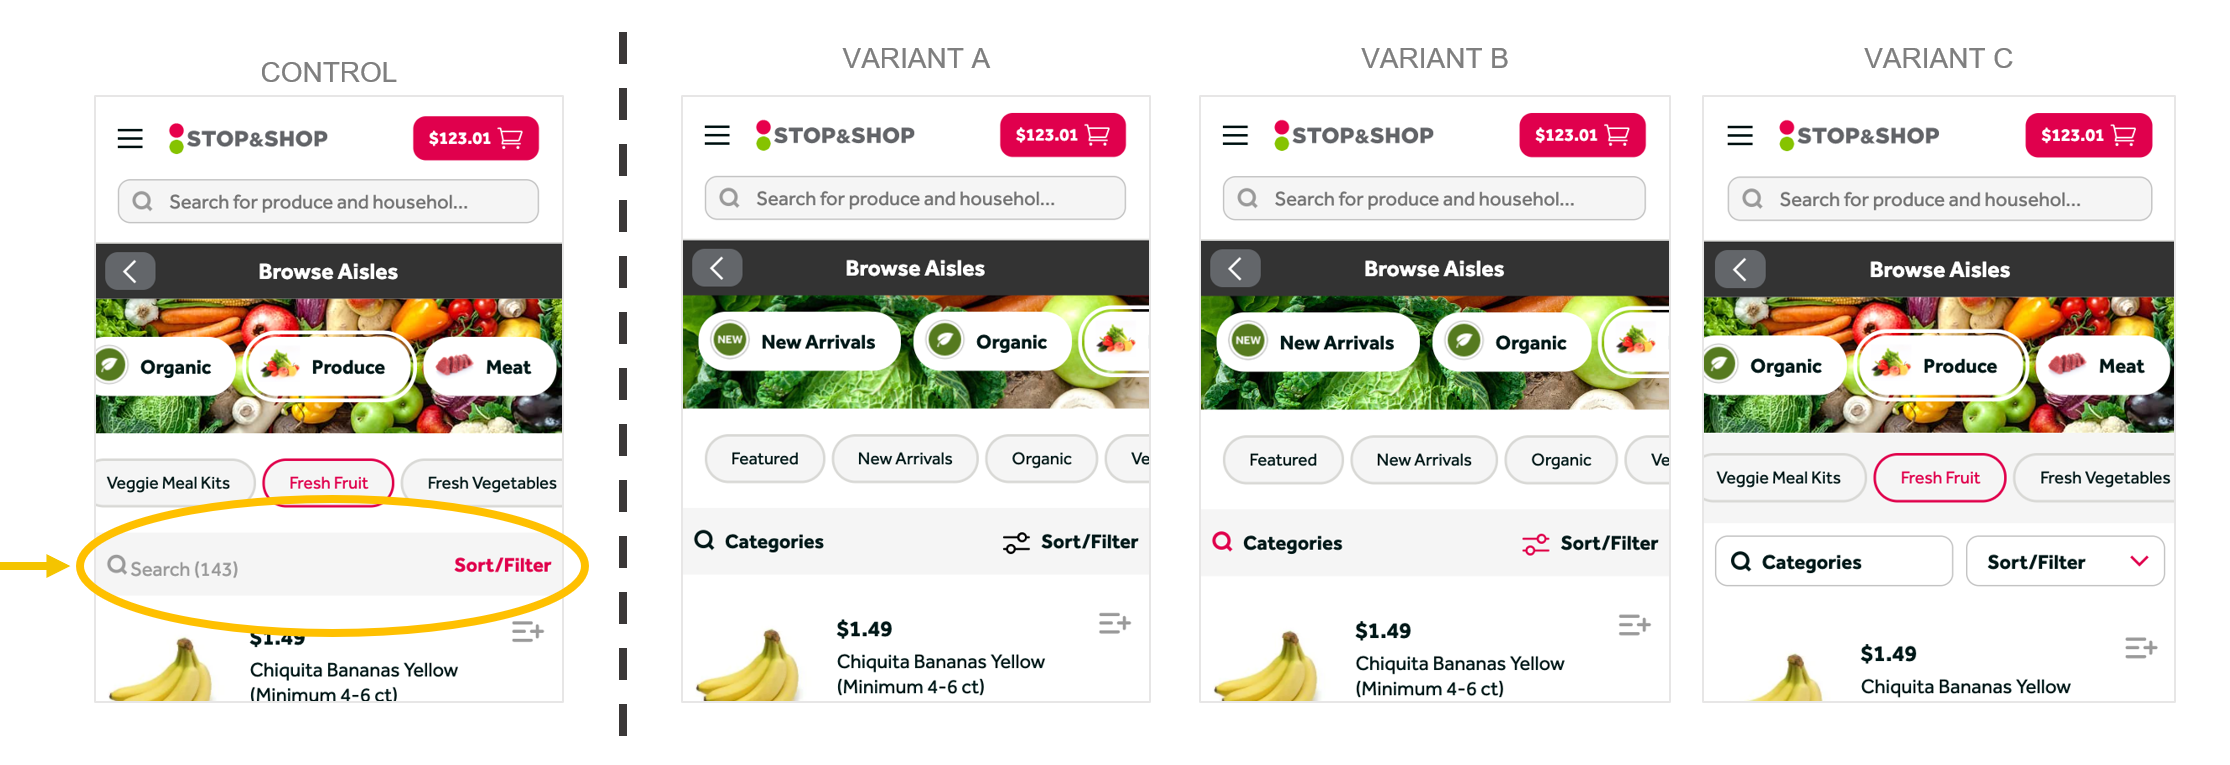 Browse Aisles Redesign